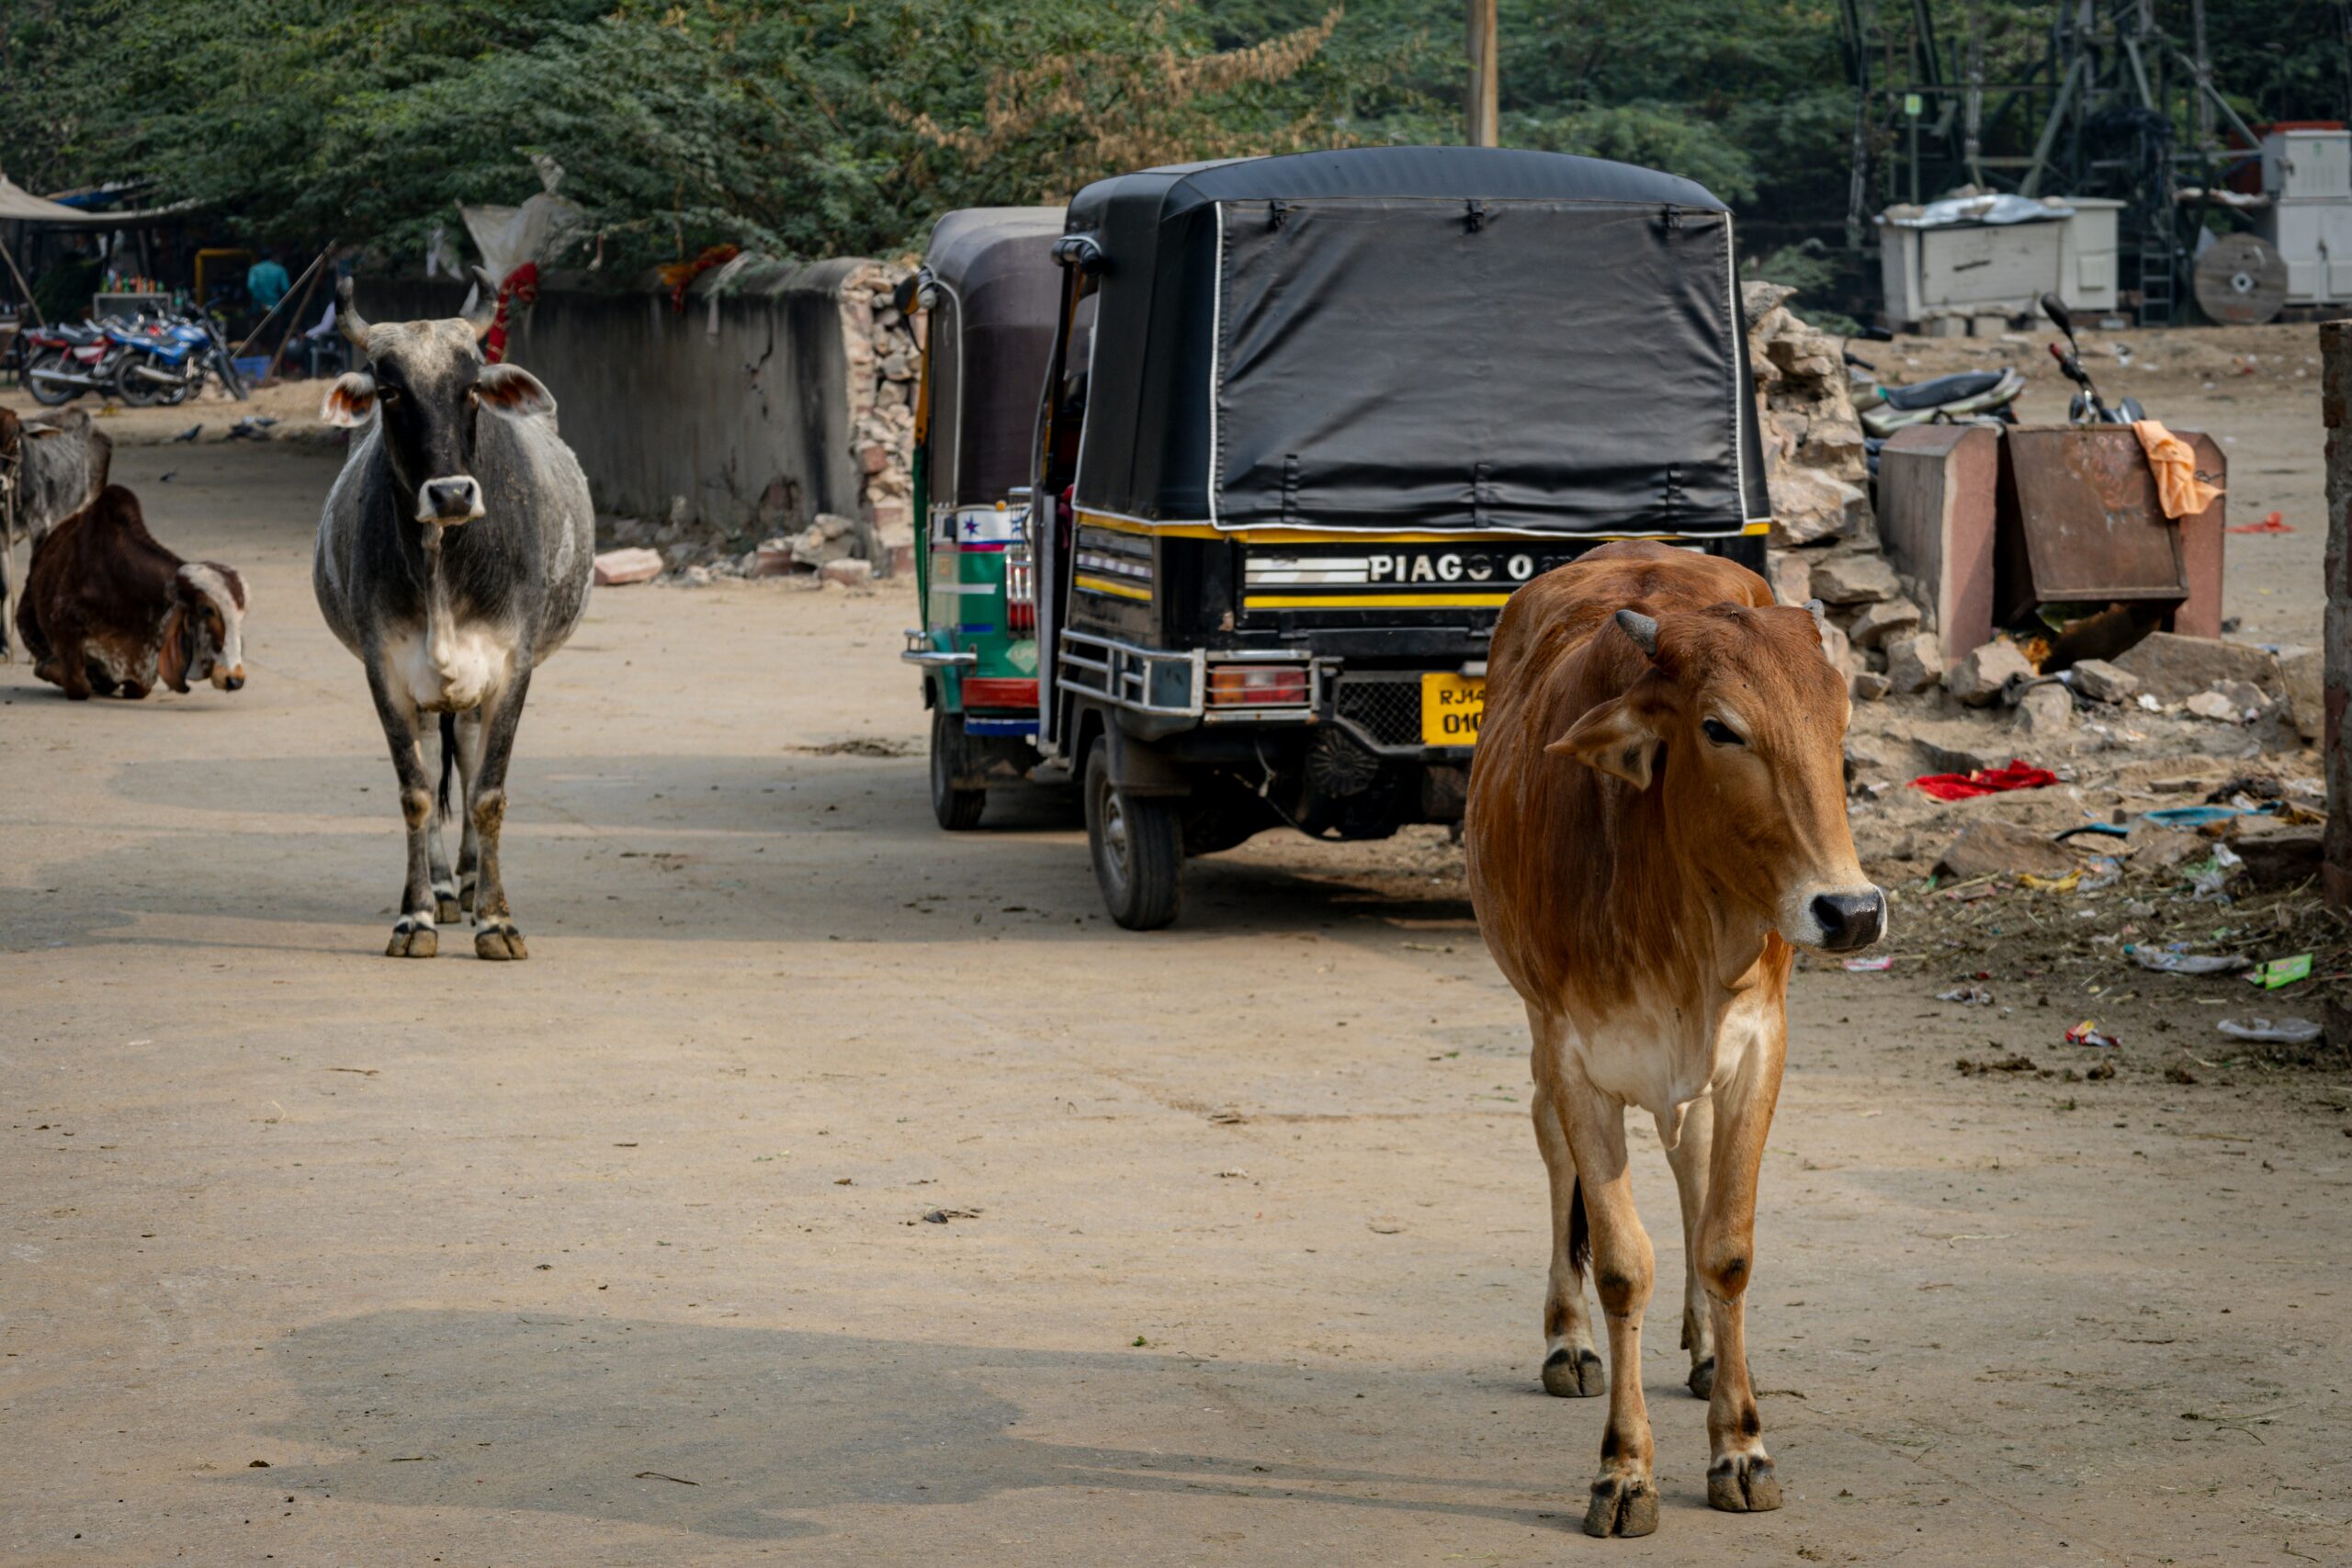 sacred cow, a couple of cows walking down a dirt road